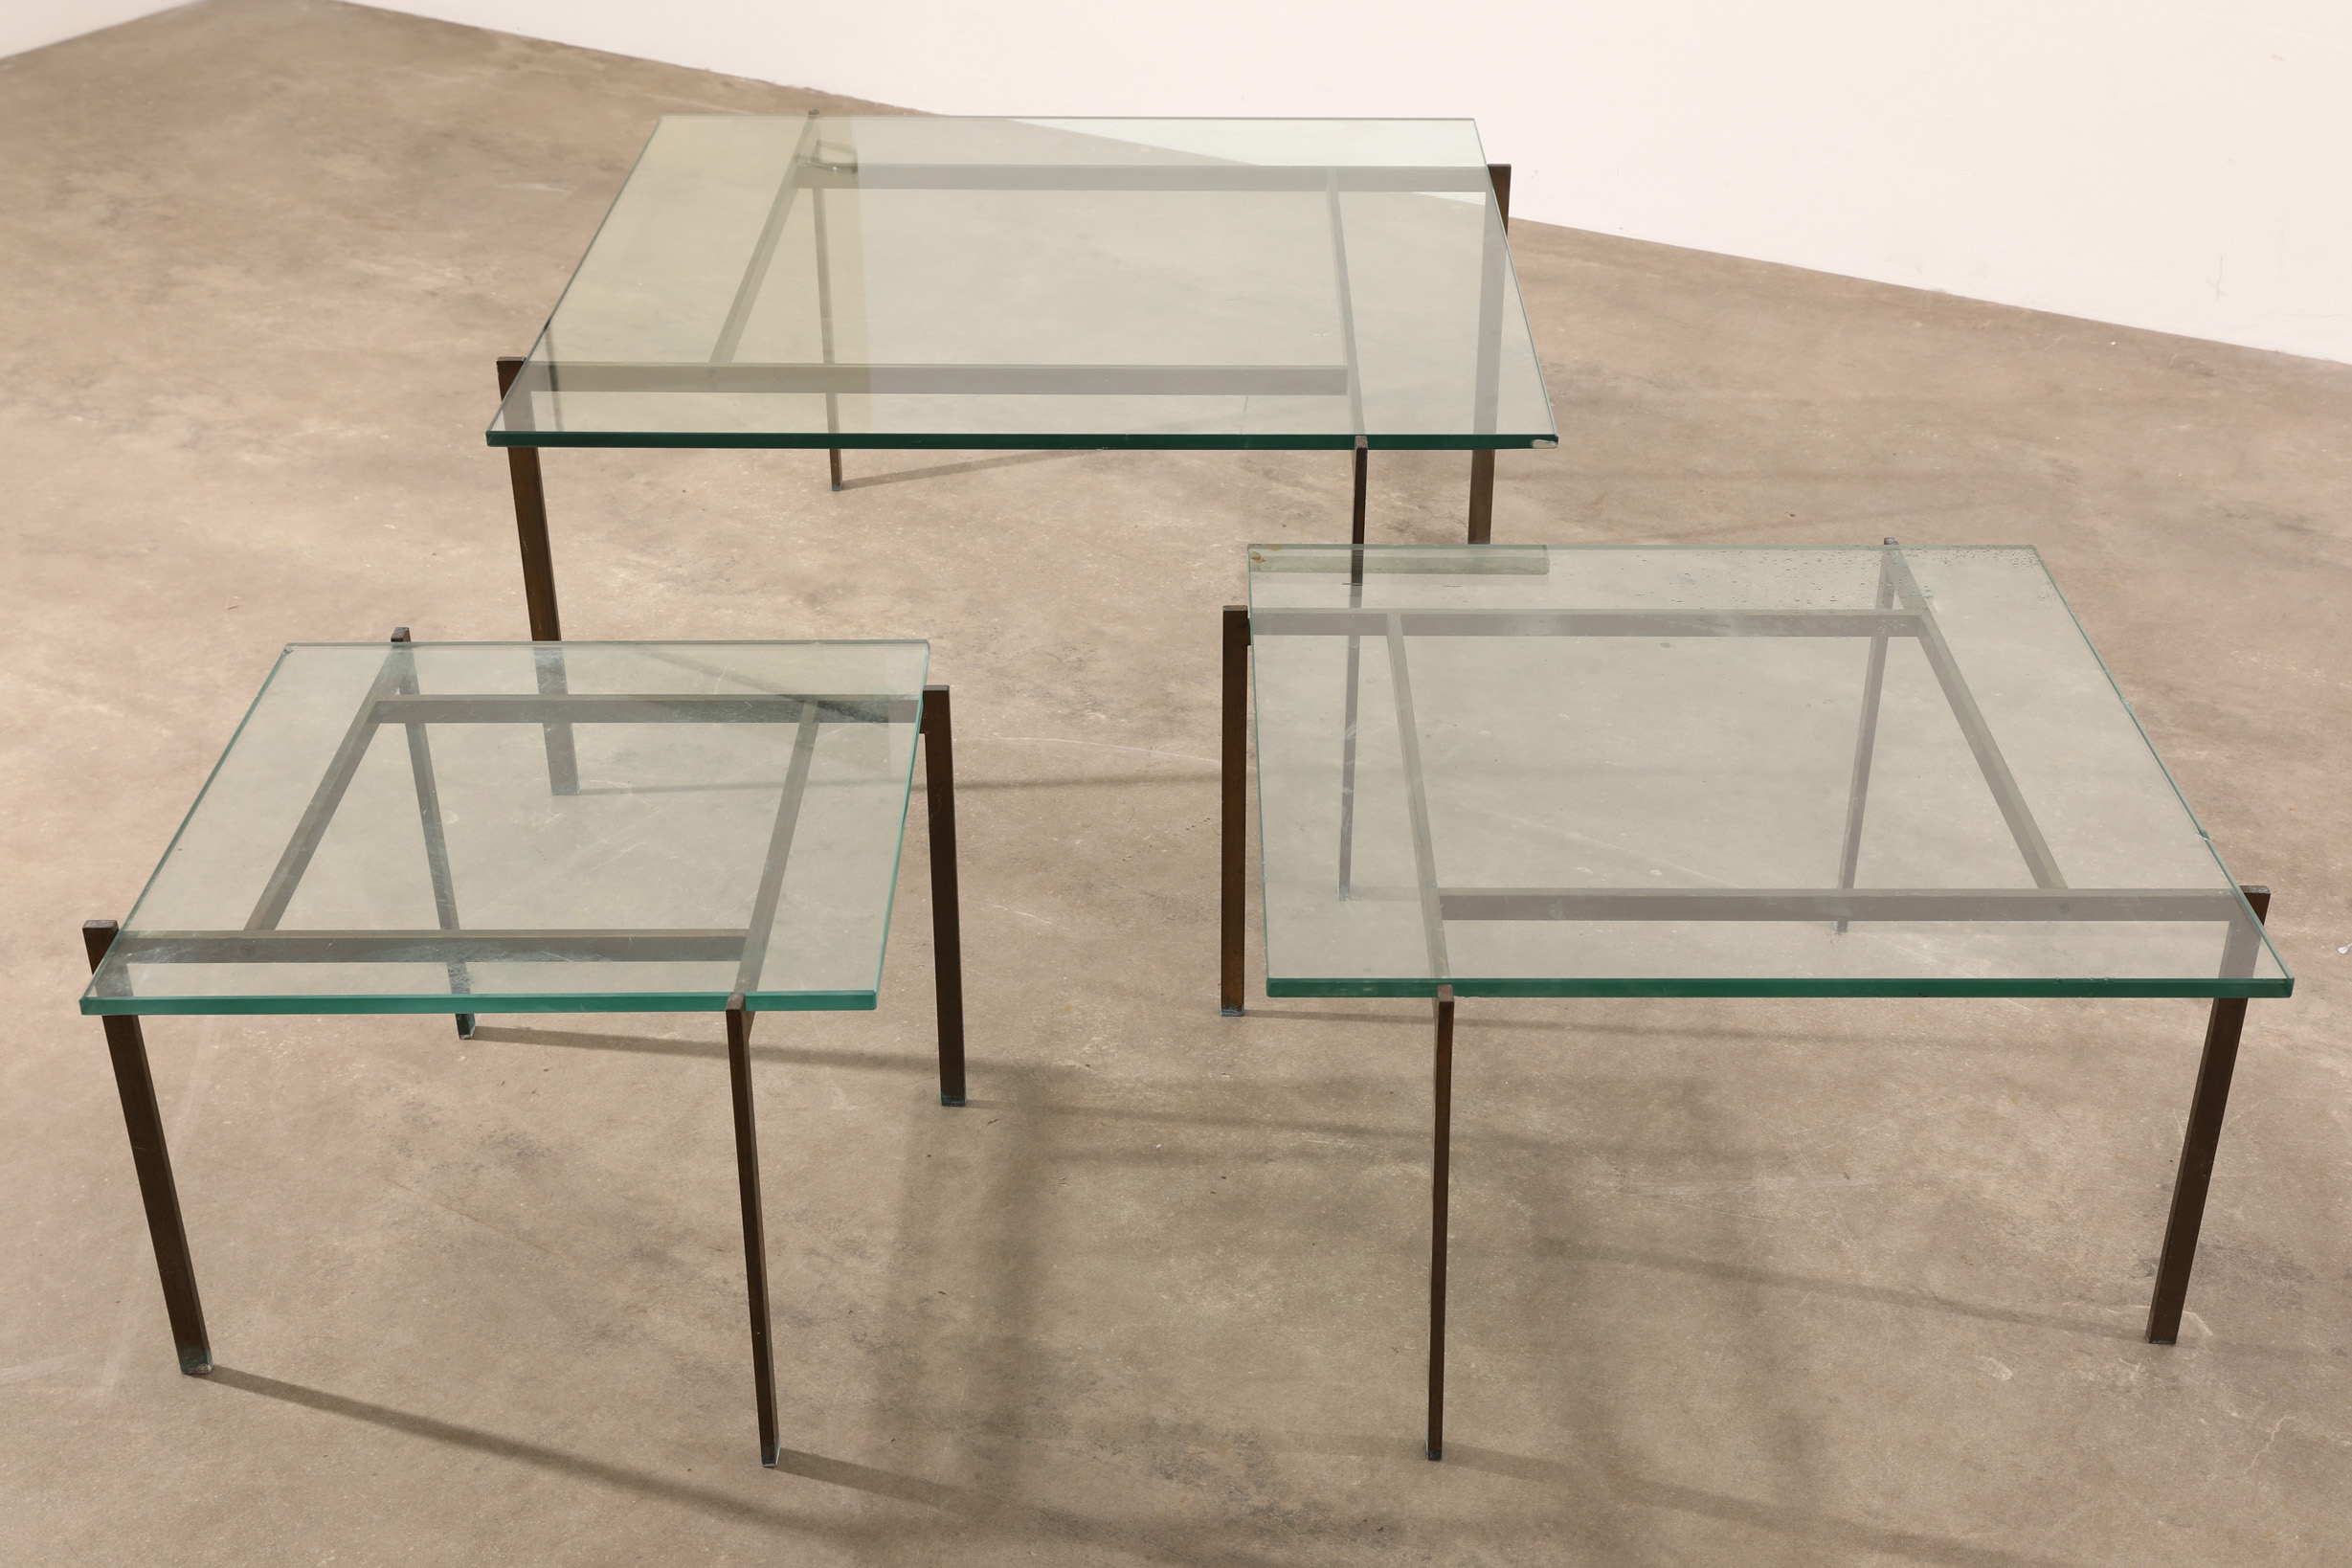 Poul Kjaerholm (in the style of), 3 nesting tables / coffeetables in the style of PK 61 - Image 2 of 4